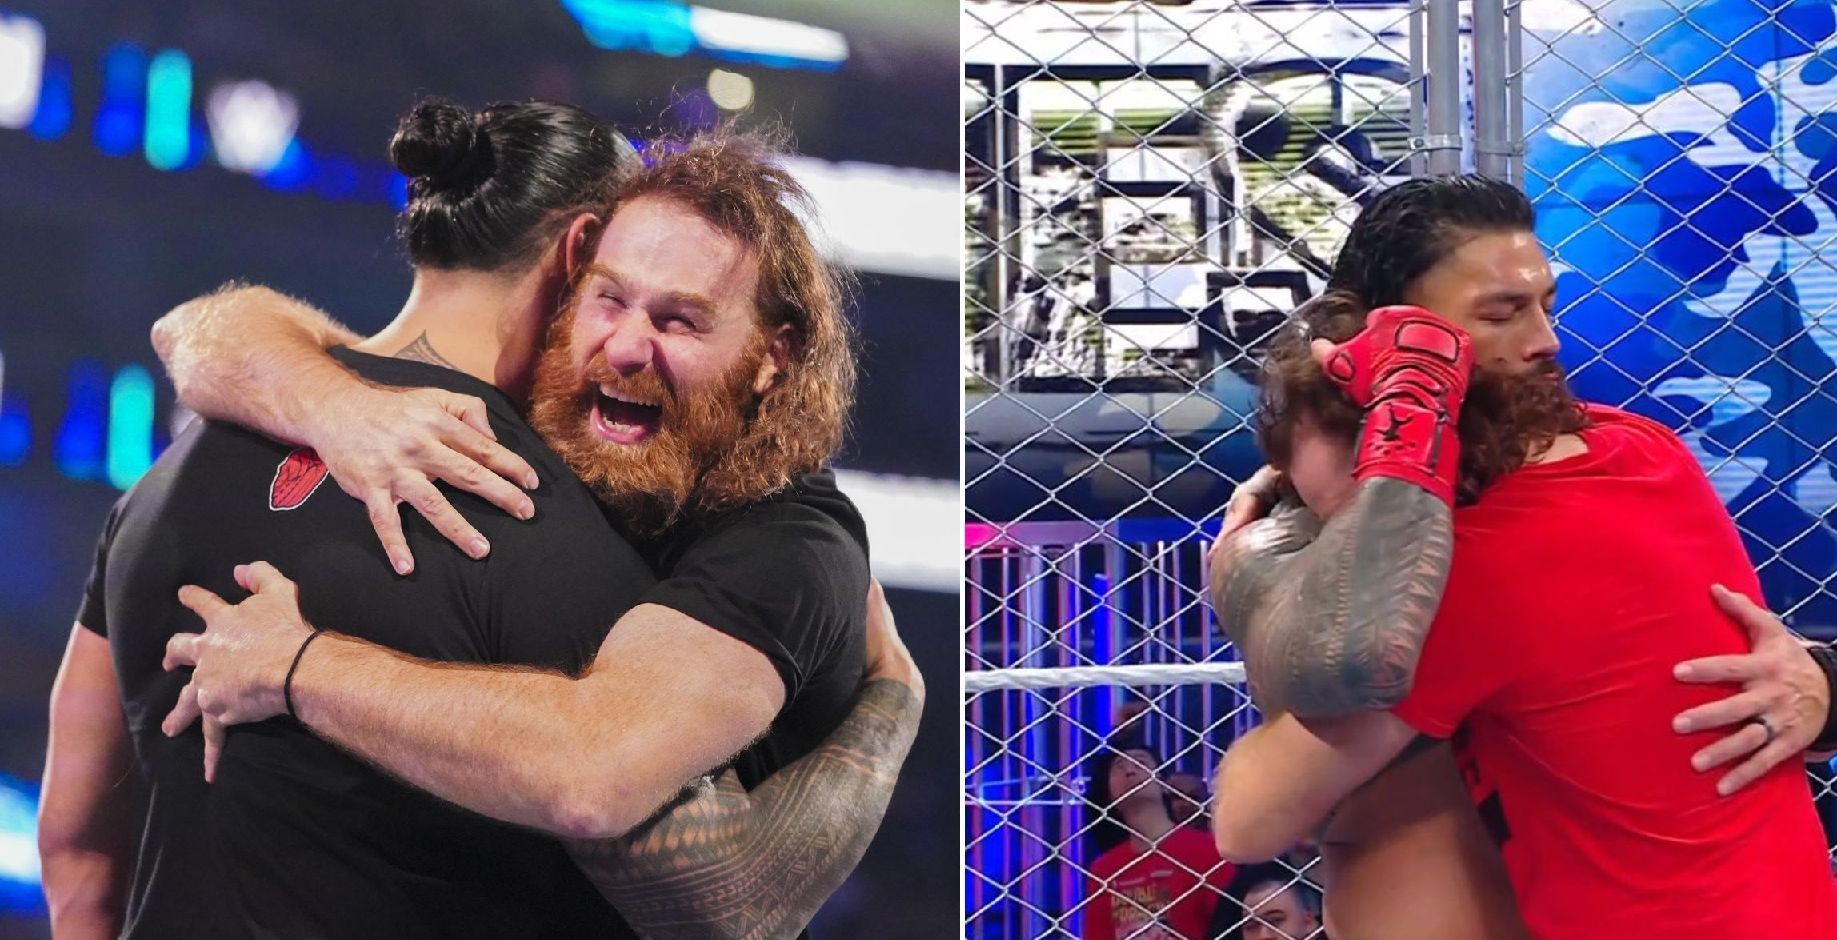 Friendships are not made to last in WWE